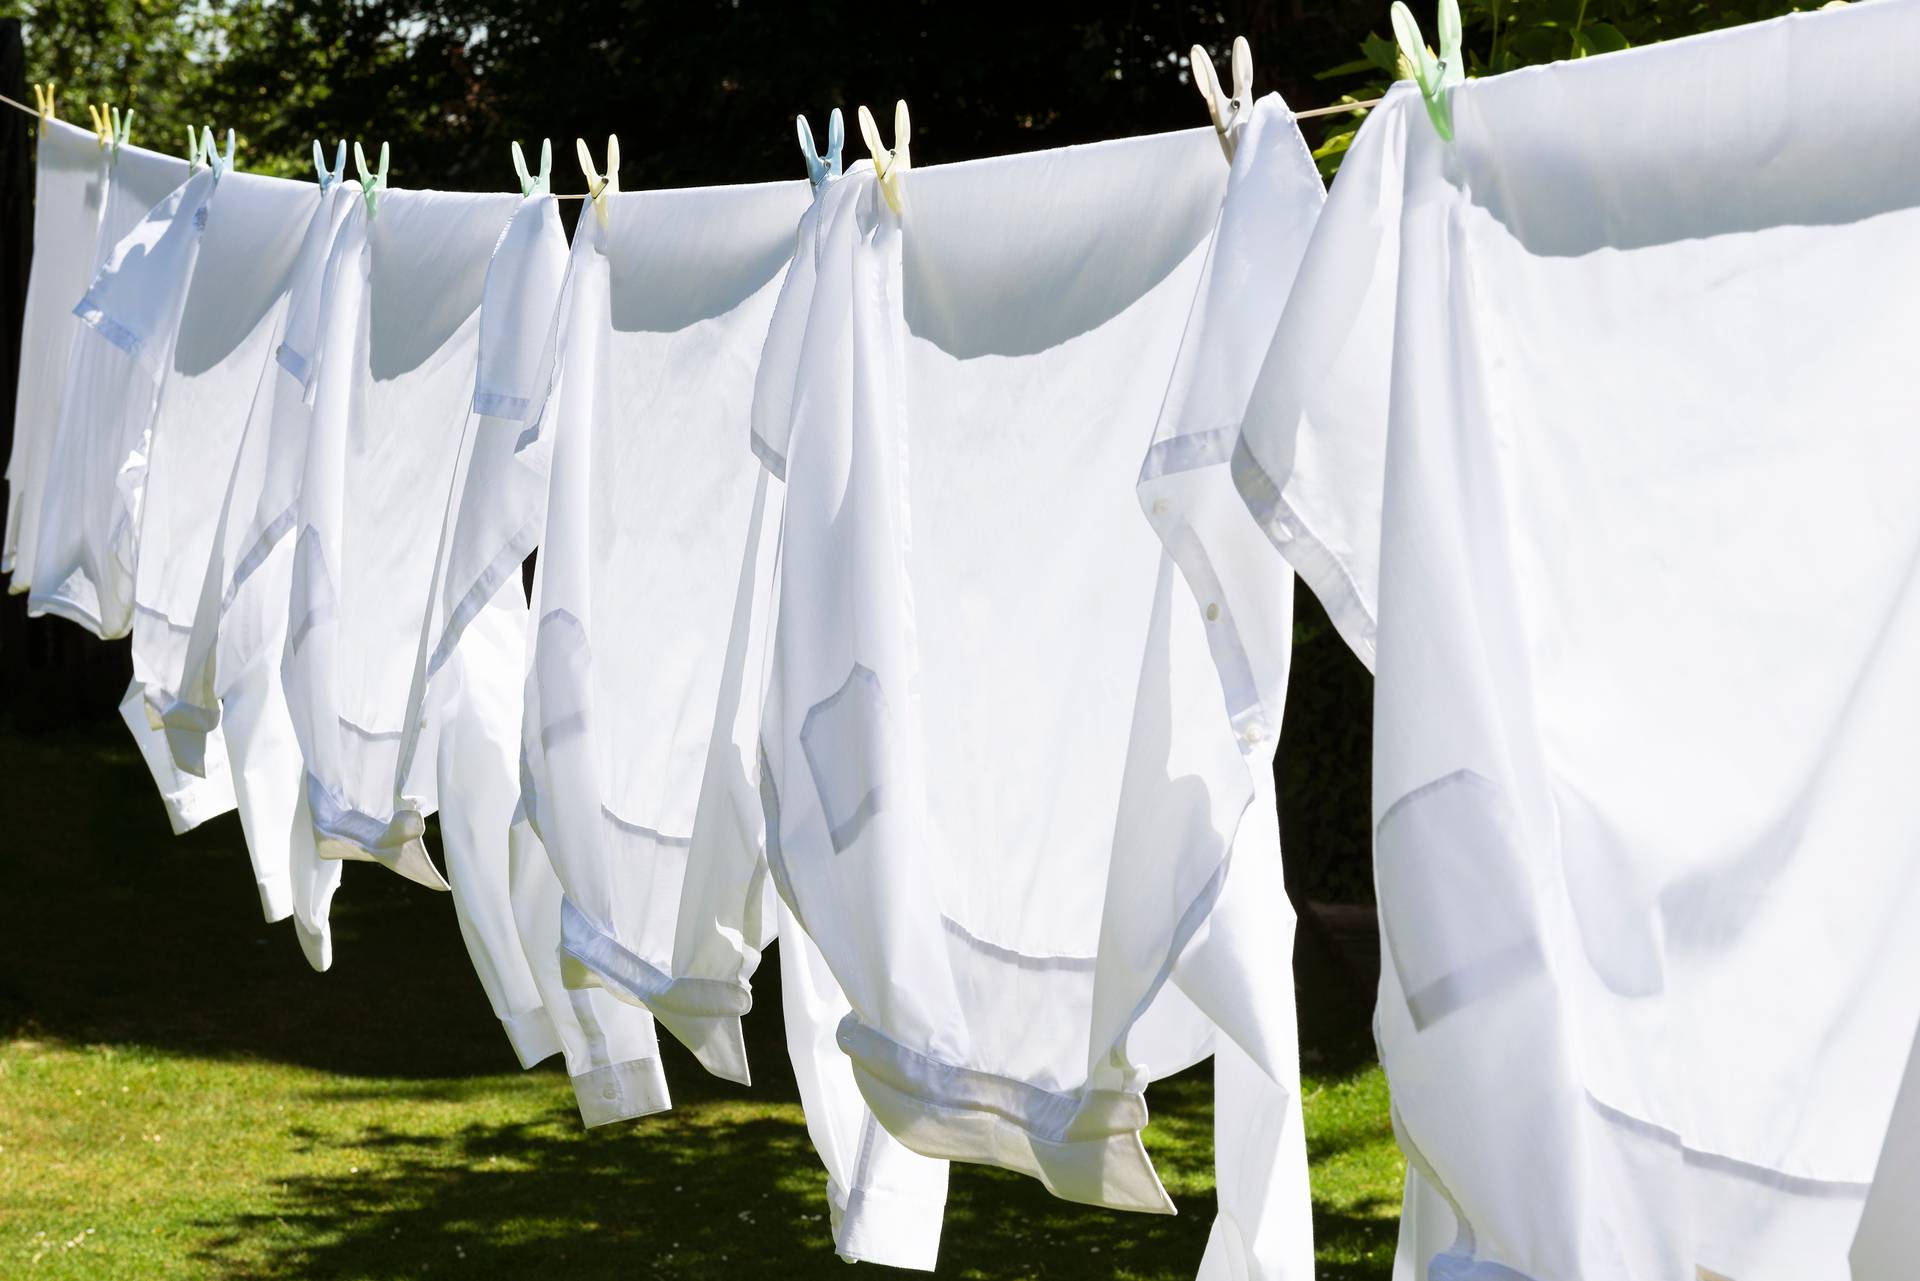 A guide on how to wash school uniforms